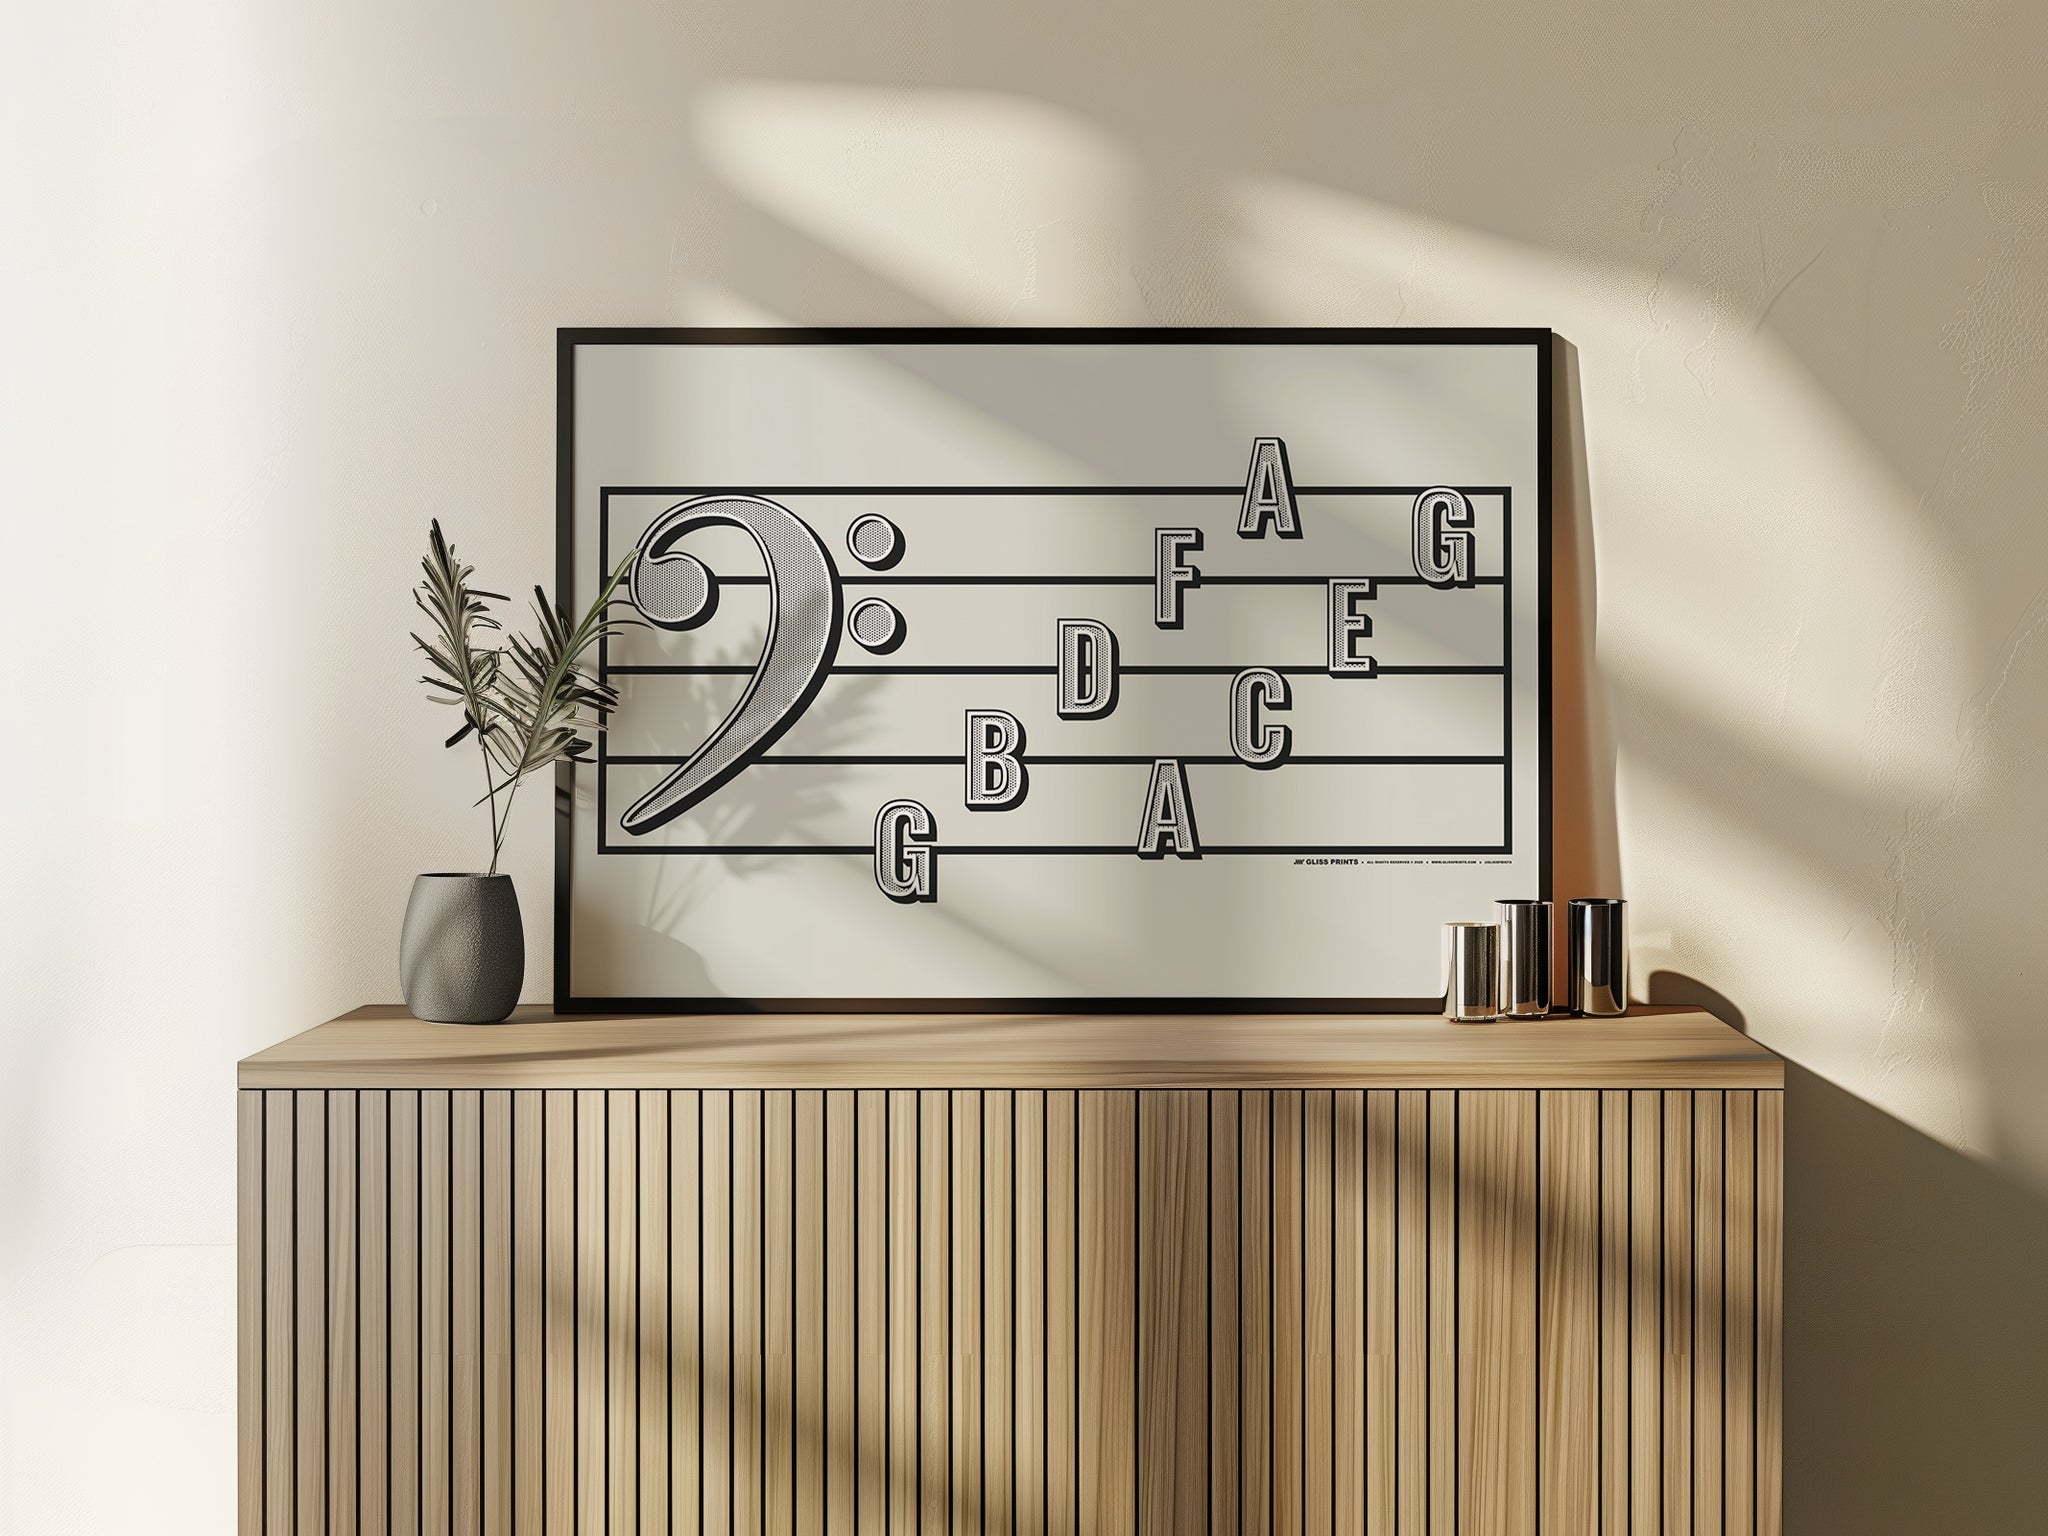 Bass Clef Note Names Poster, Cream